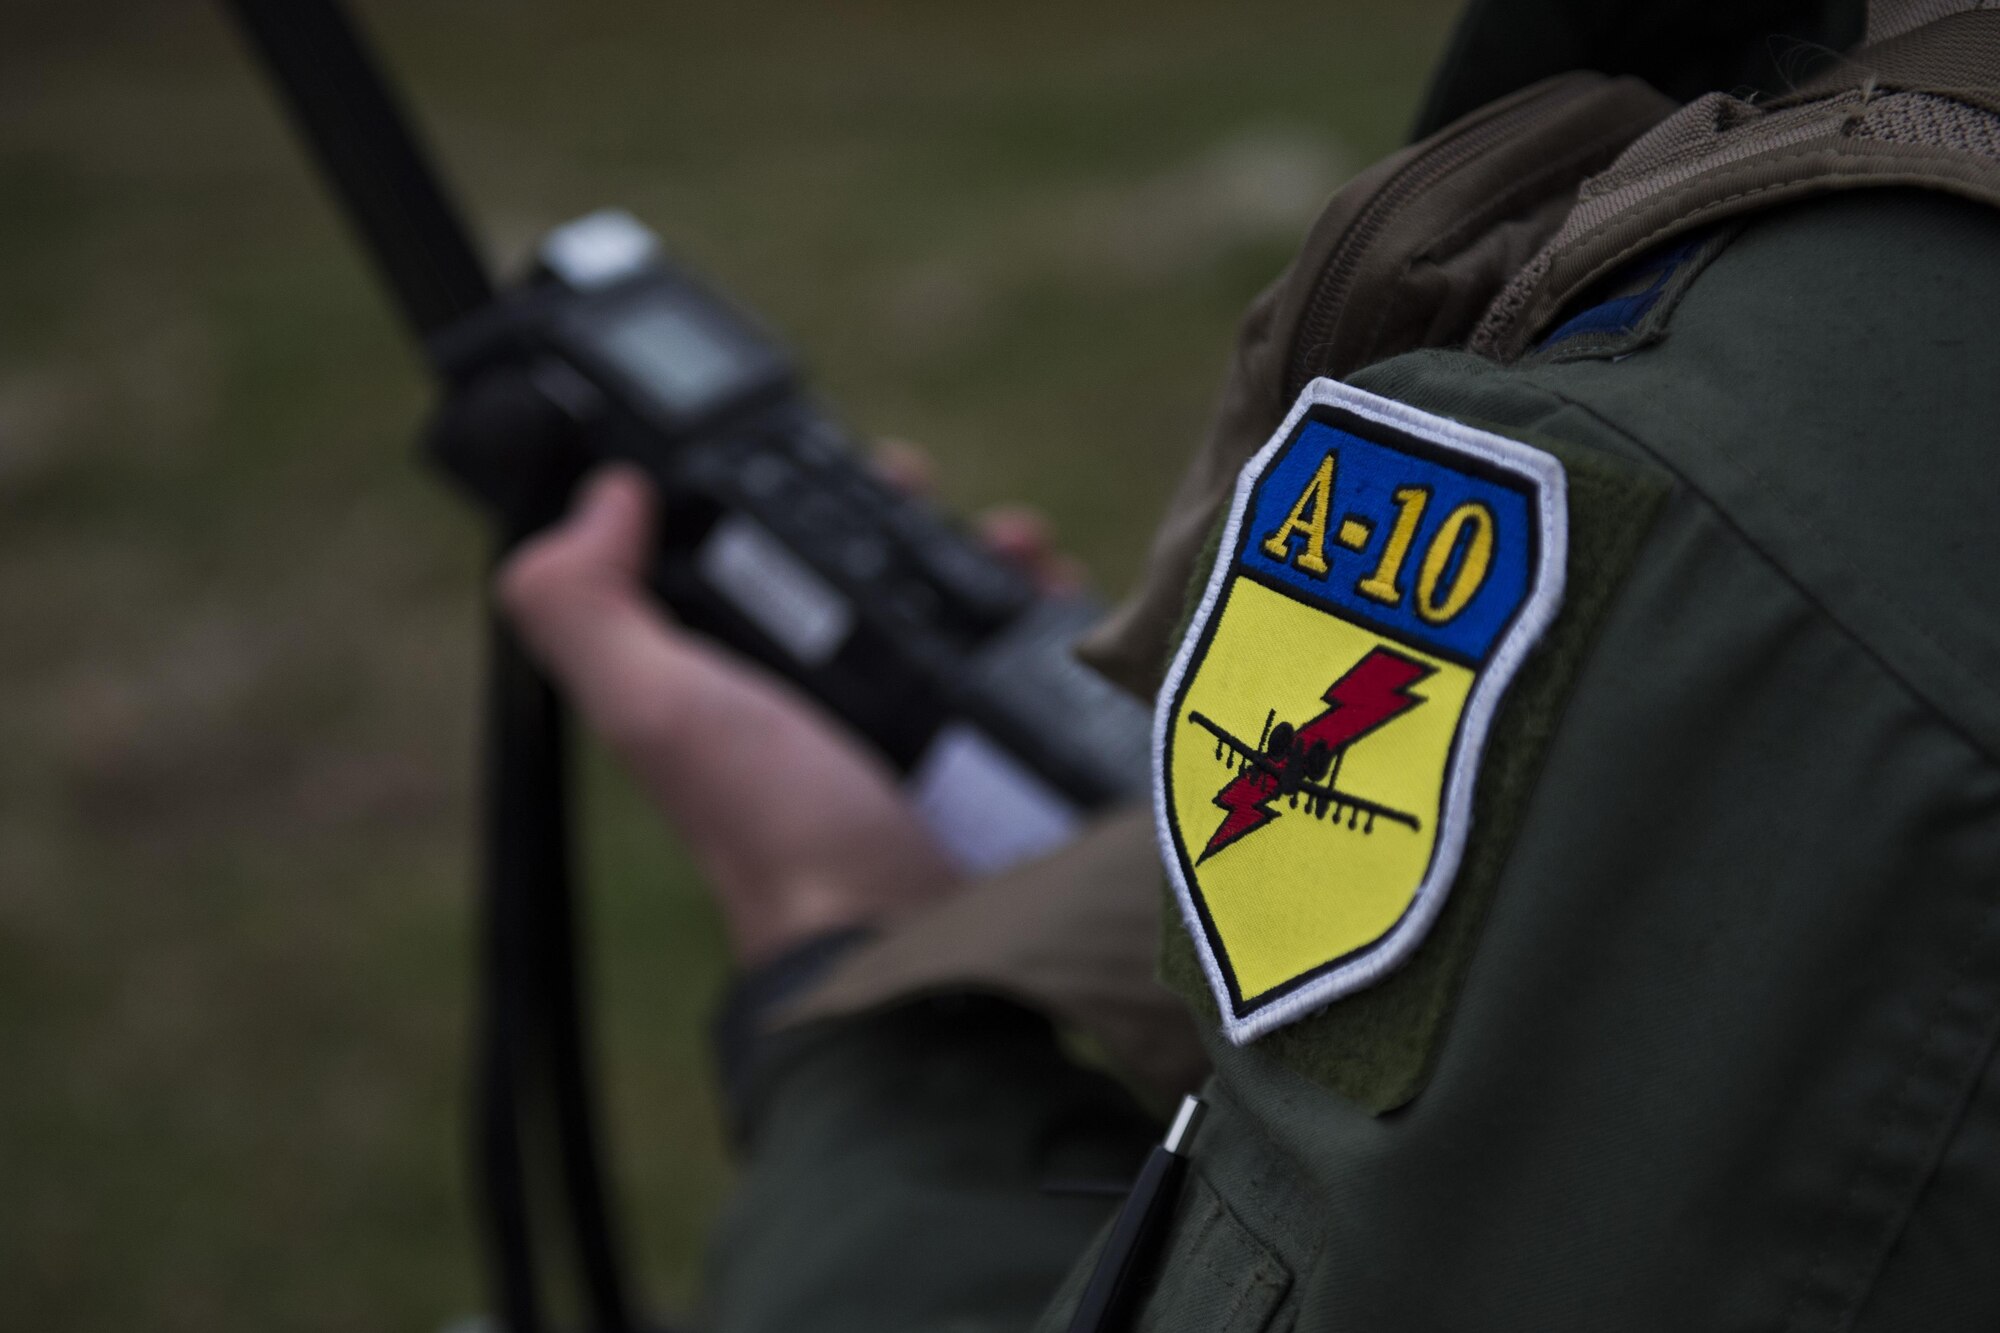 PLOVDIV, Bulgaria - A patch is displayed on the shoulder of Italian air force Captain Roberto Manzo, a 74th Expeditionary Fighter Squadron A-10C Thunderbolt II aircraft exchange pilot, during combat search and rescue training near Plovdiv, Bulgaria, Feb. 11, 2016. Manzo used a radio and played the role of ‘survivor’ during the CSAR training which involved four A-10s working together with Bulgarian Special Forces. (U.S. Air Force photo by Airman 1st Class Luke Kitterman/Released)